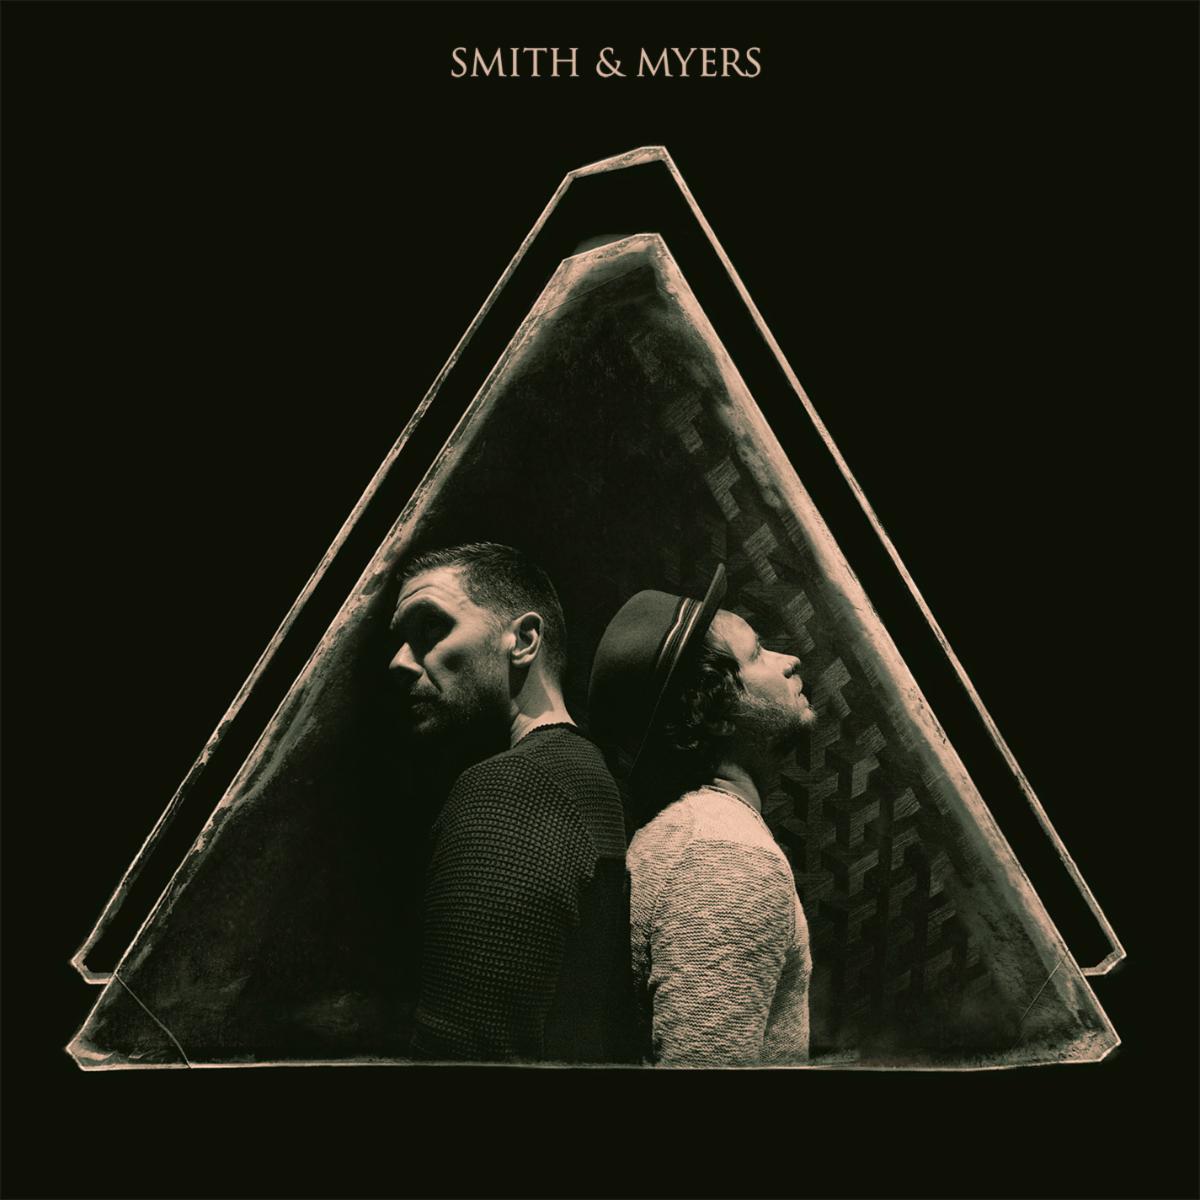 Brent Smith & Zach Myers Release Poignant & Timely Dual Singles As Smith & Myers